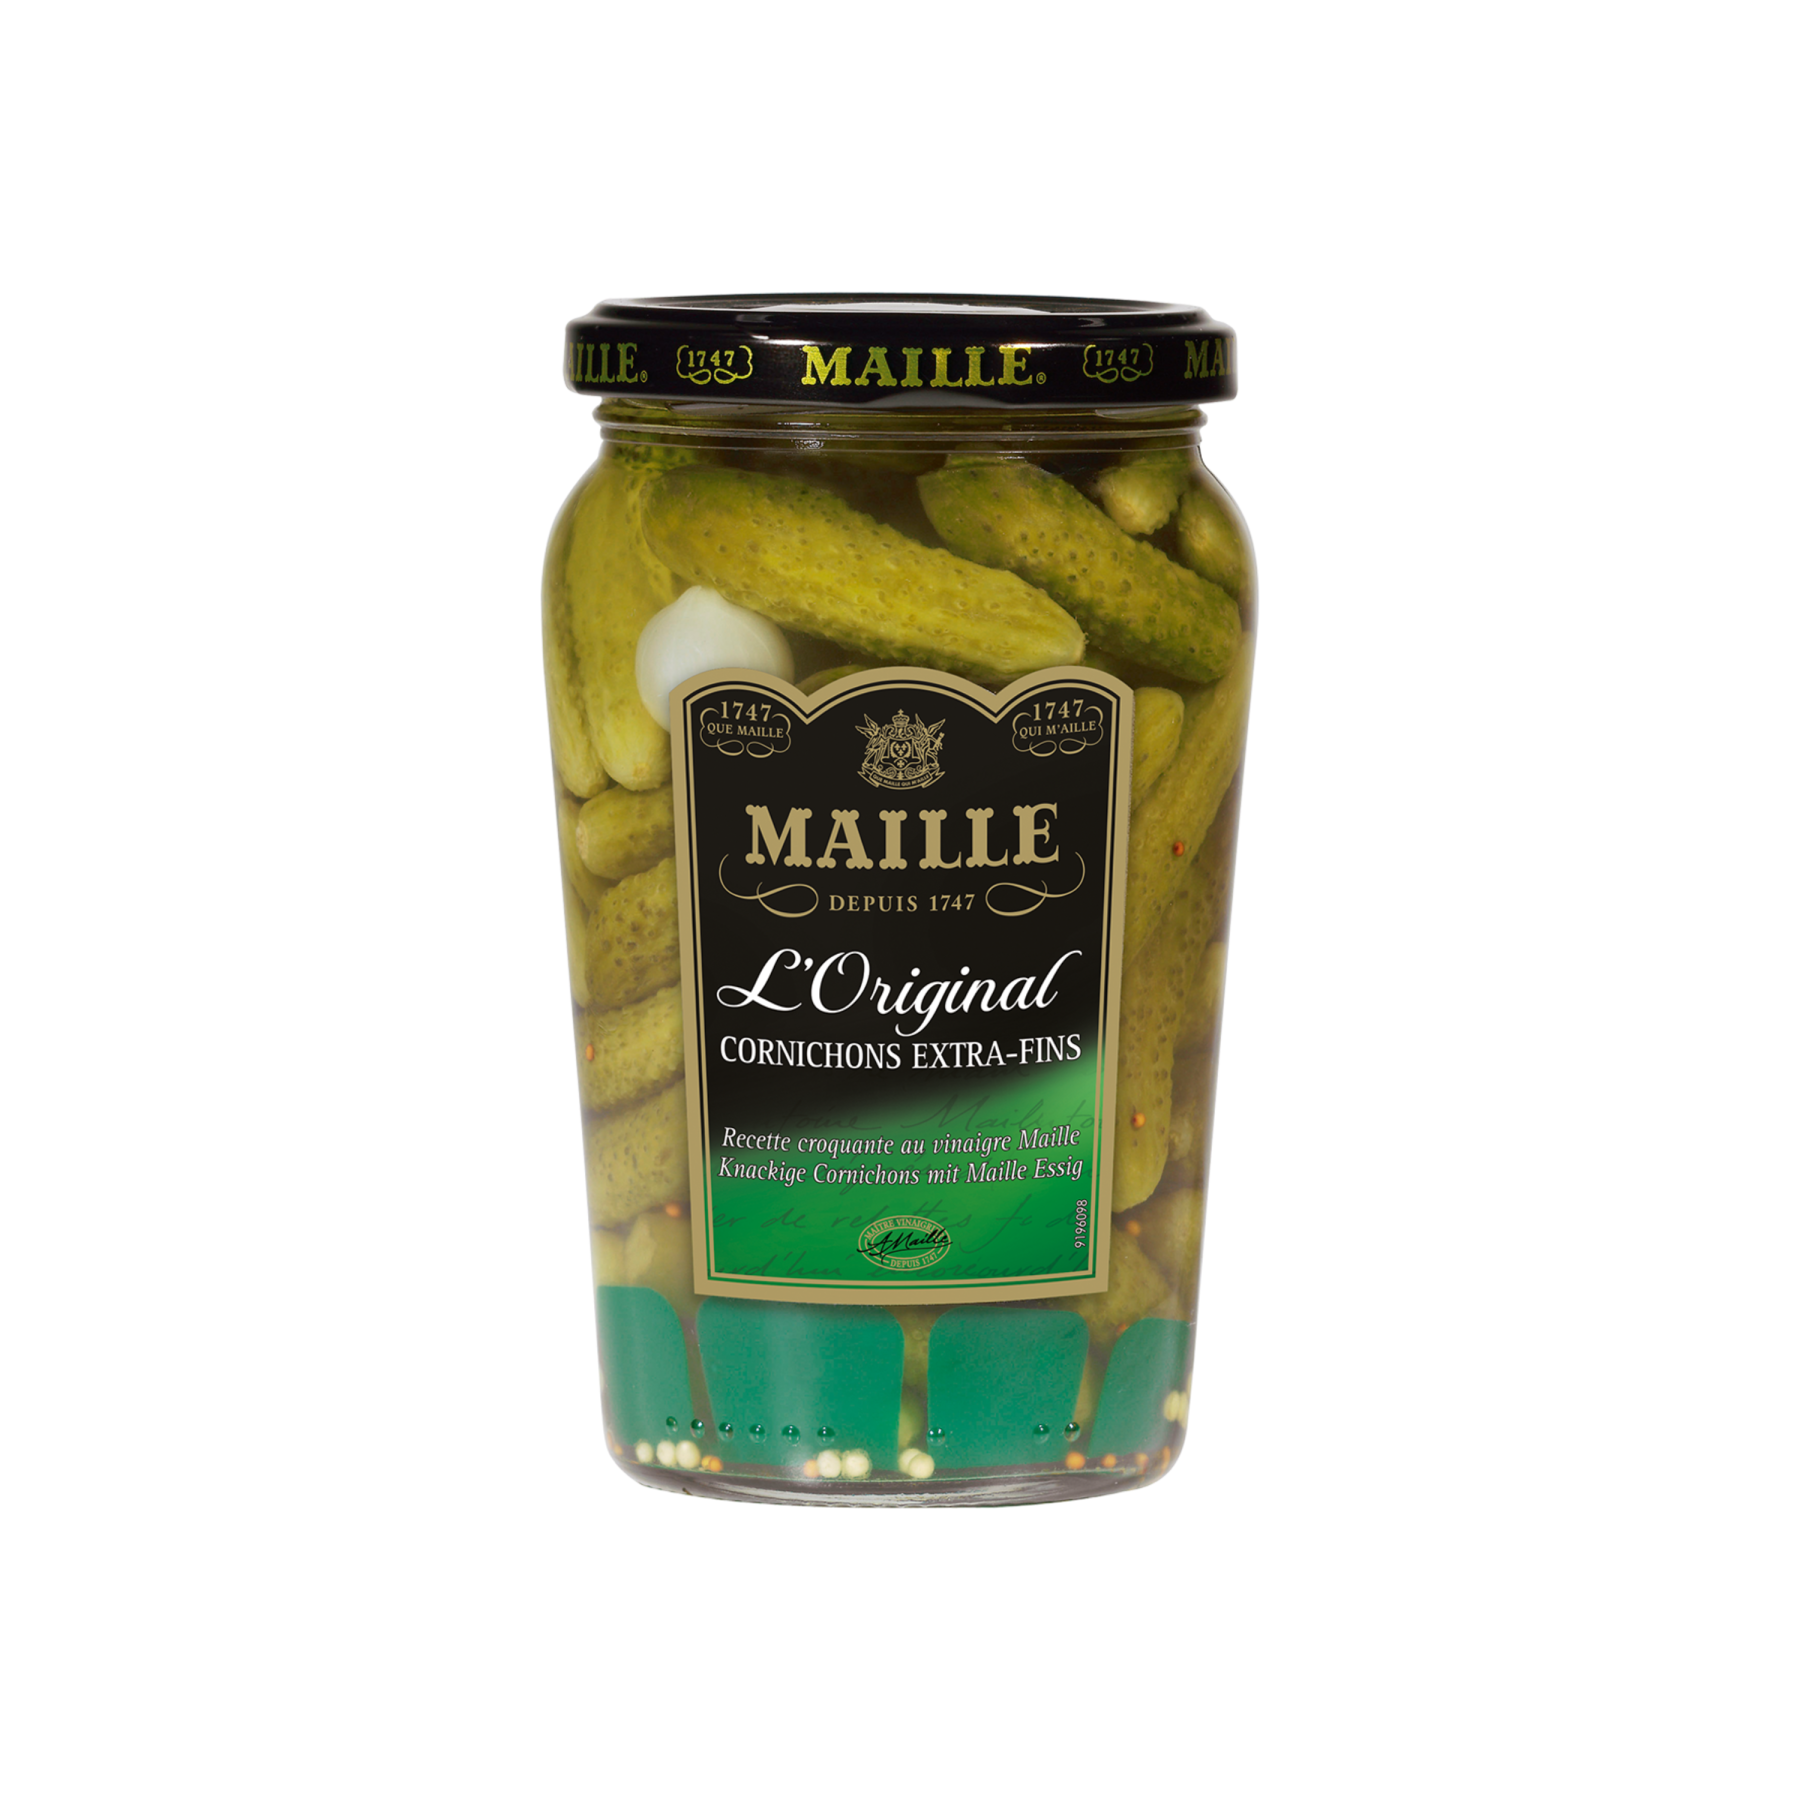 MAILLE CORNICHONS EXTRA-FINS